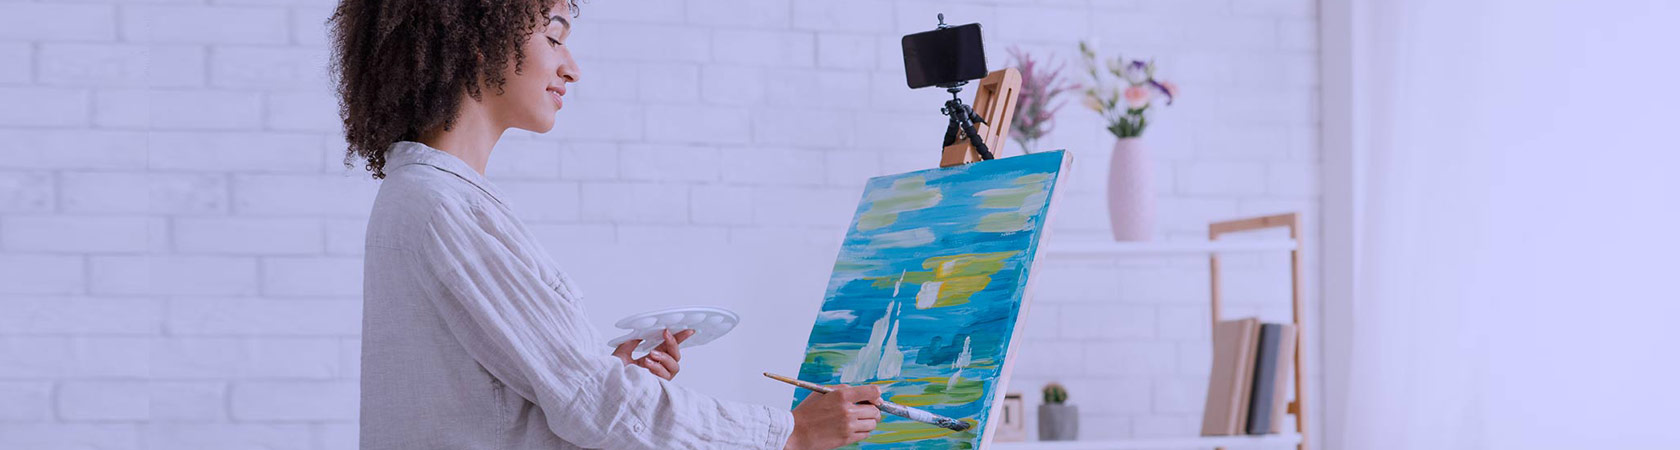 woman painting while she's streaming live on social